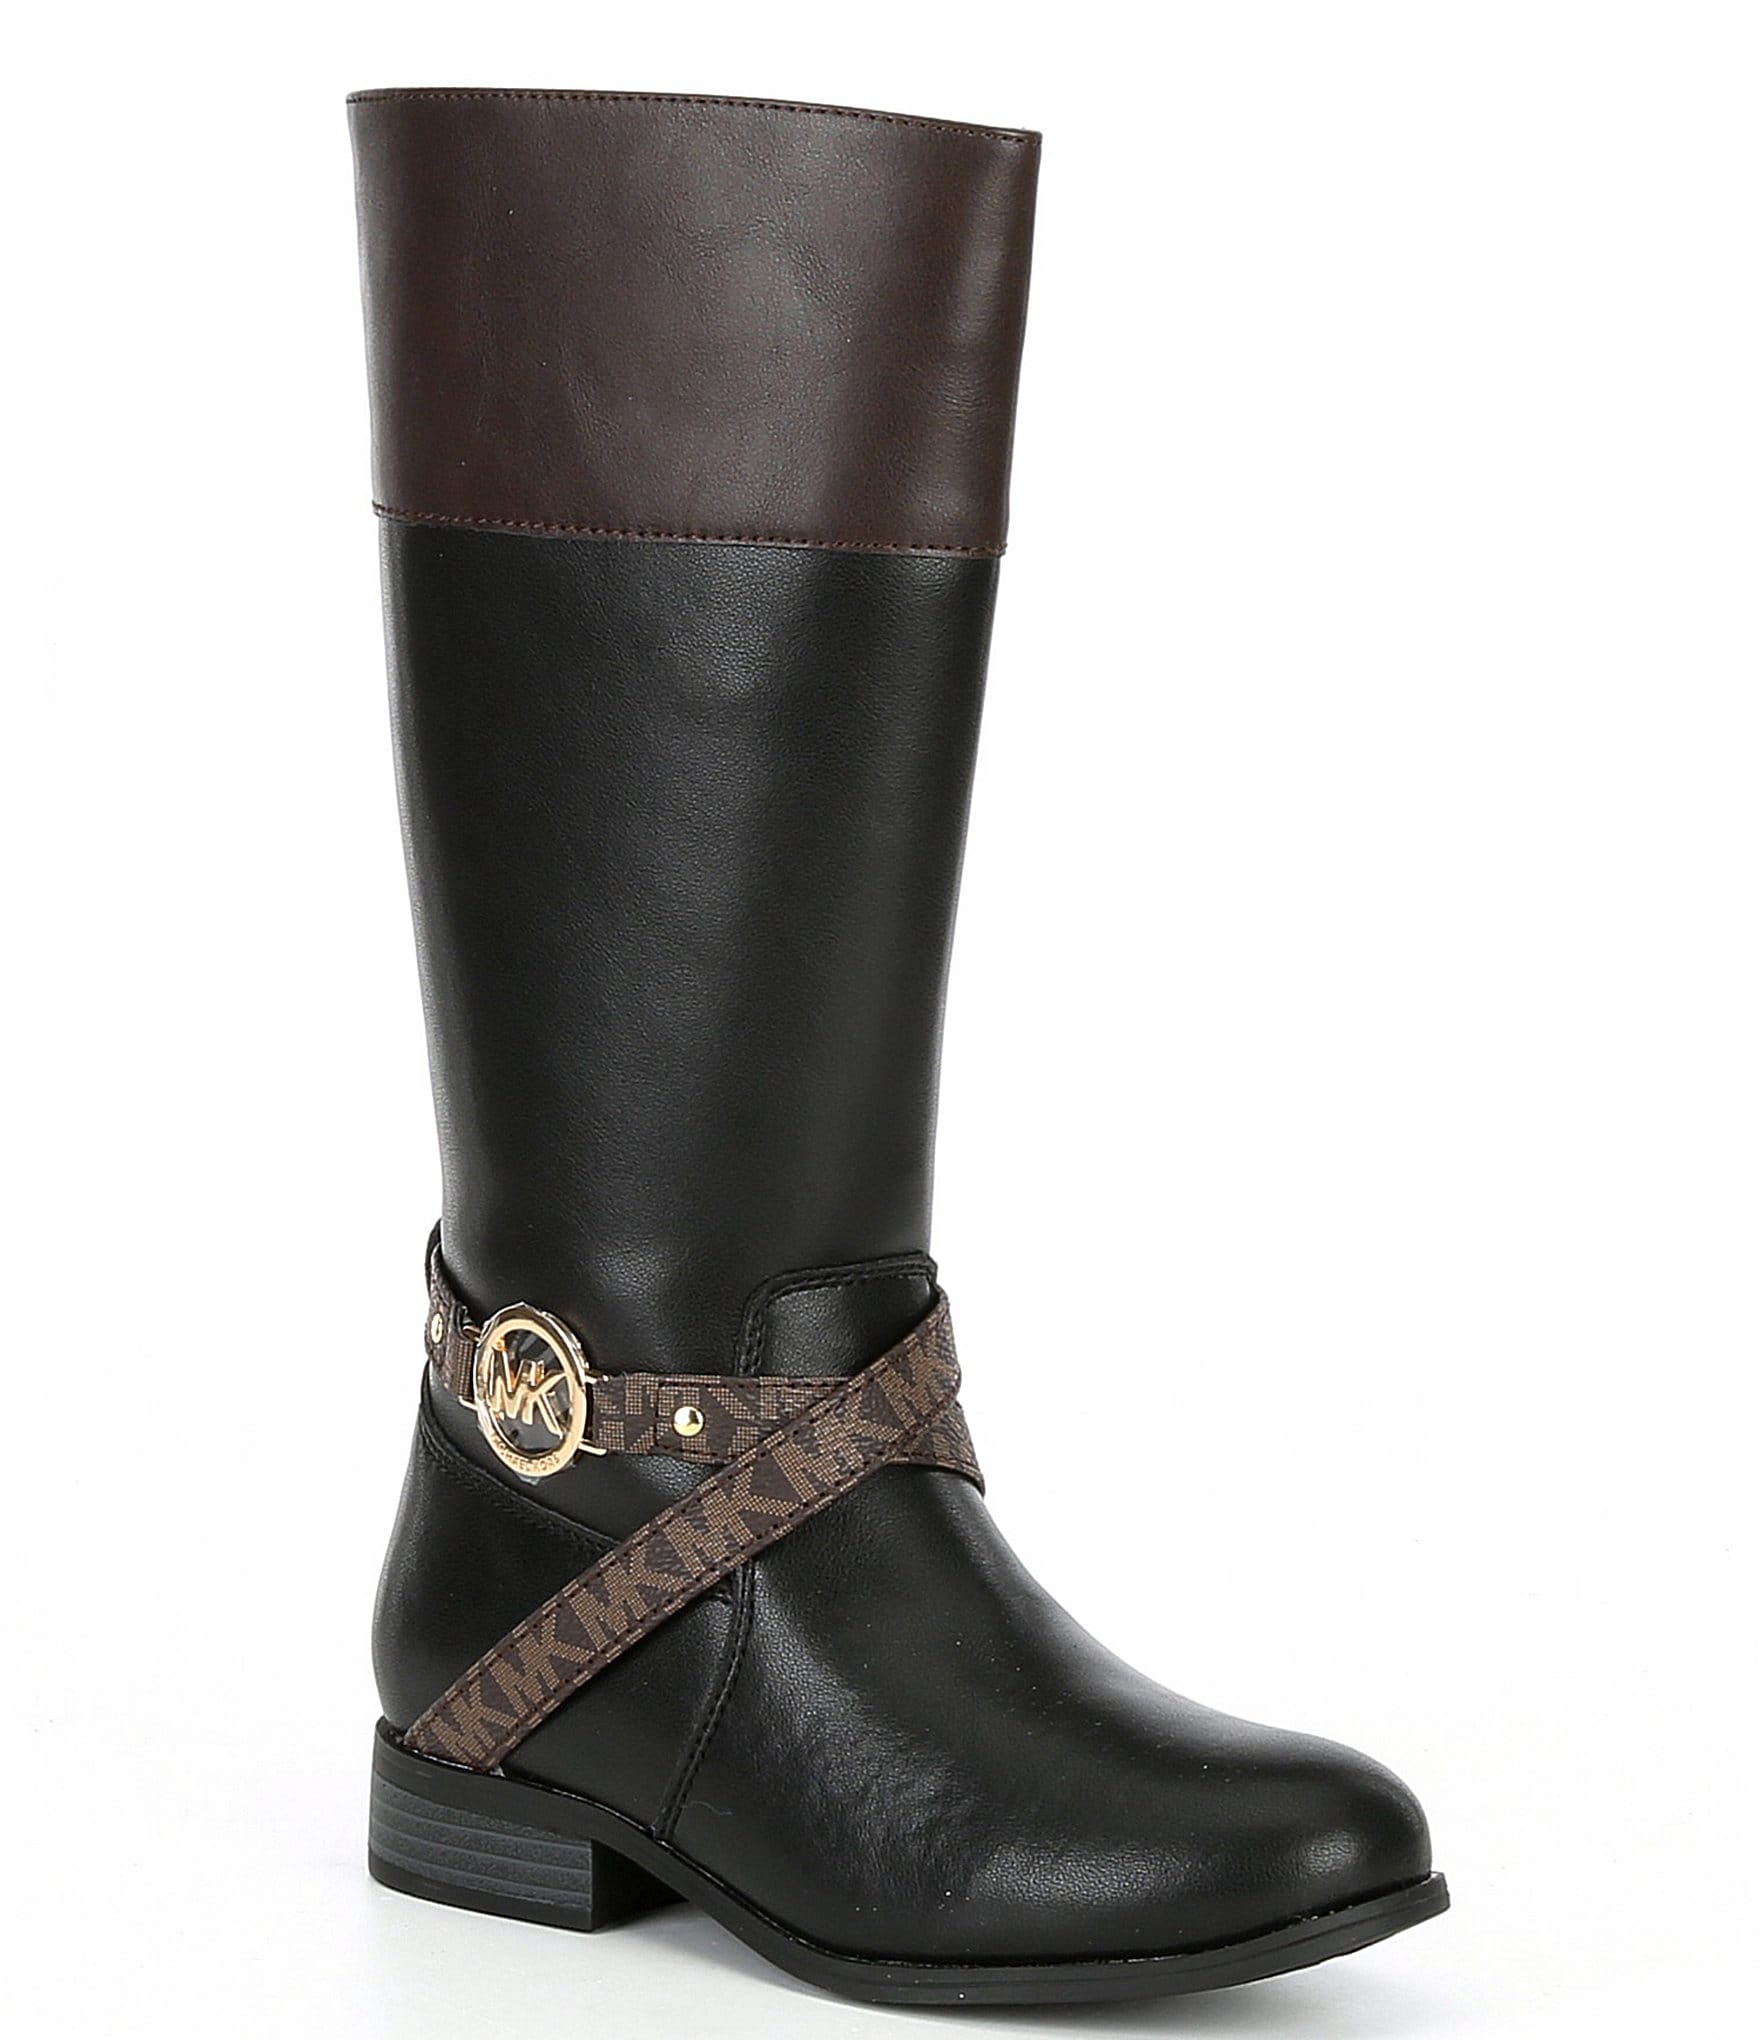 Michael Kors Brown Riding Boots | vlr.eng.br